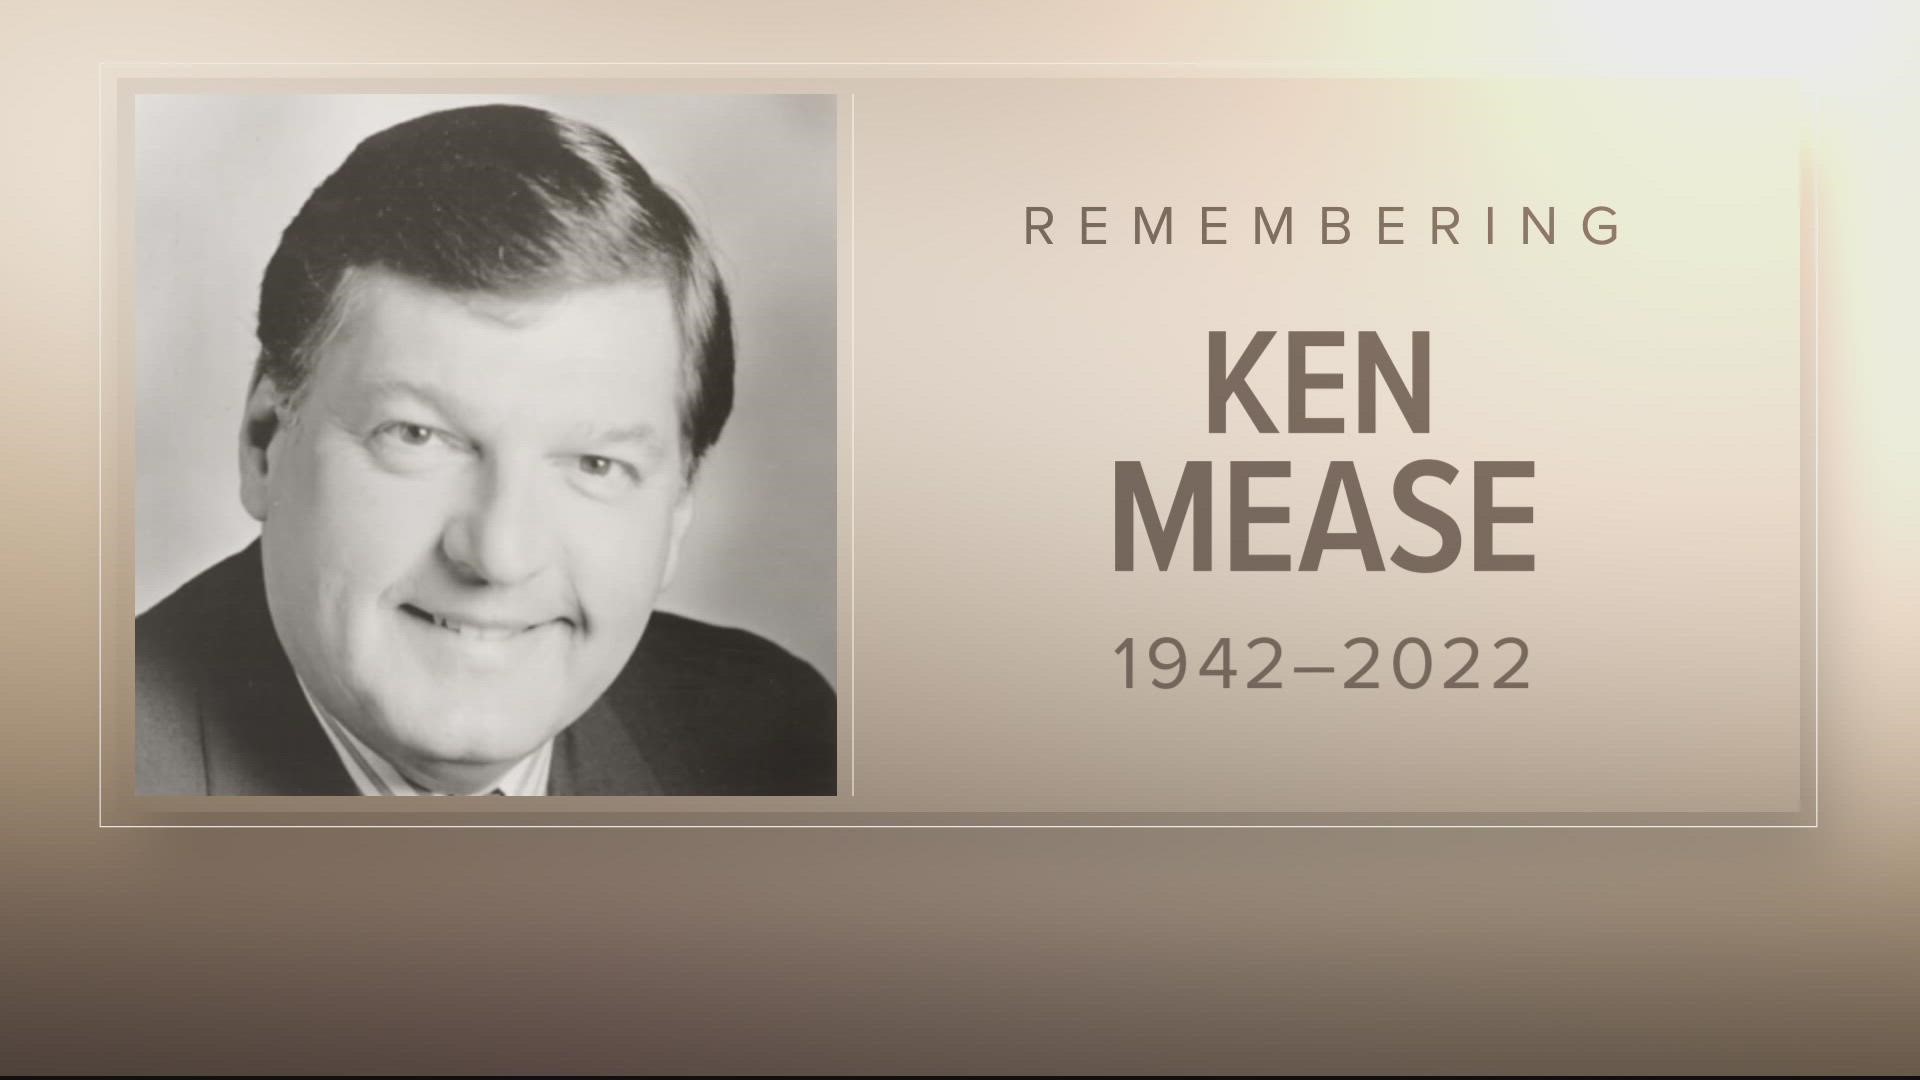 It's with a heavy heart that we have to let you know that WUSA9 has lost another member of our family--Ken Mease.